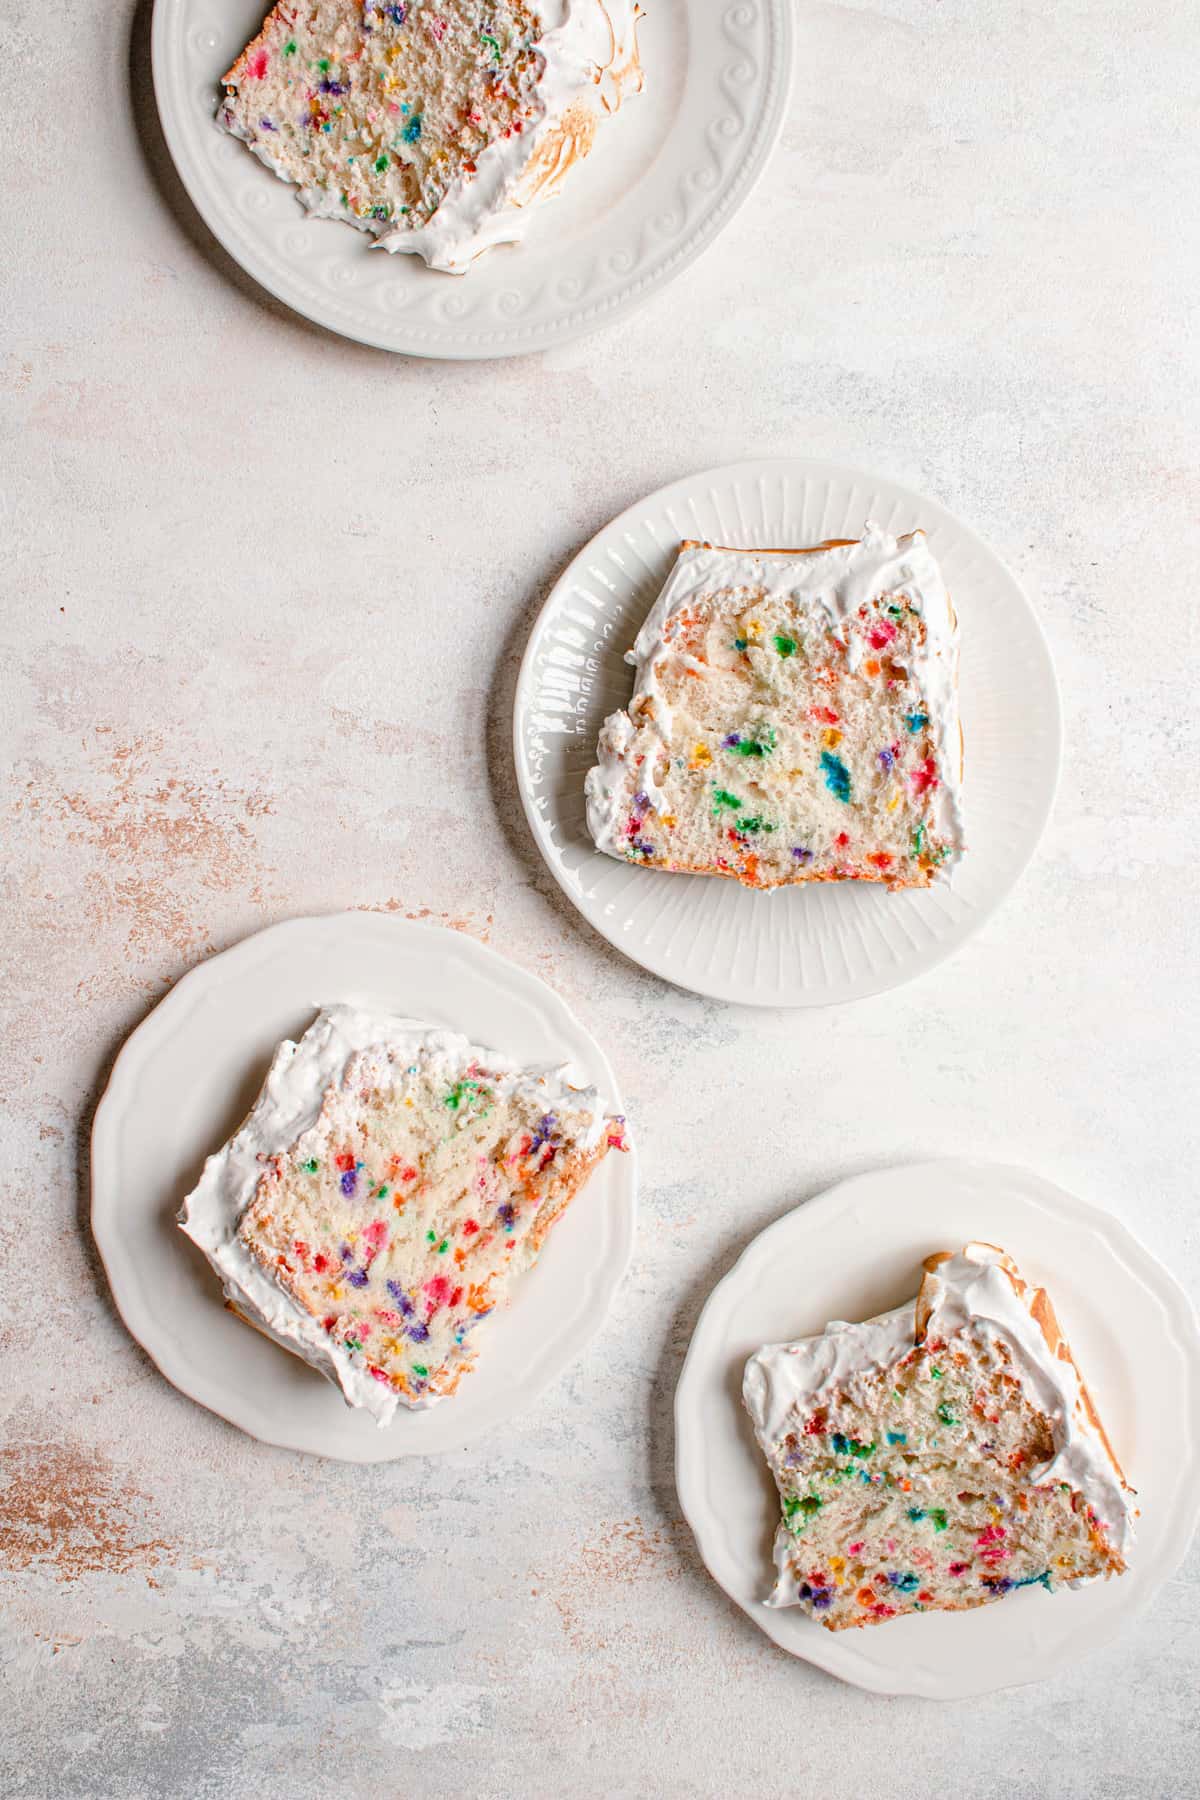 Funfetti angel food cake with marshmallow frosting